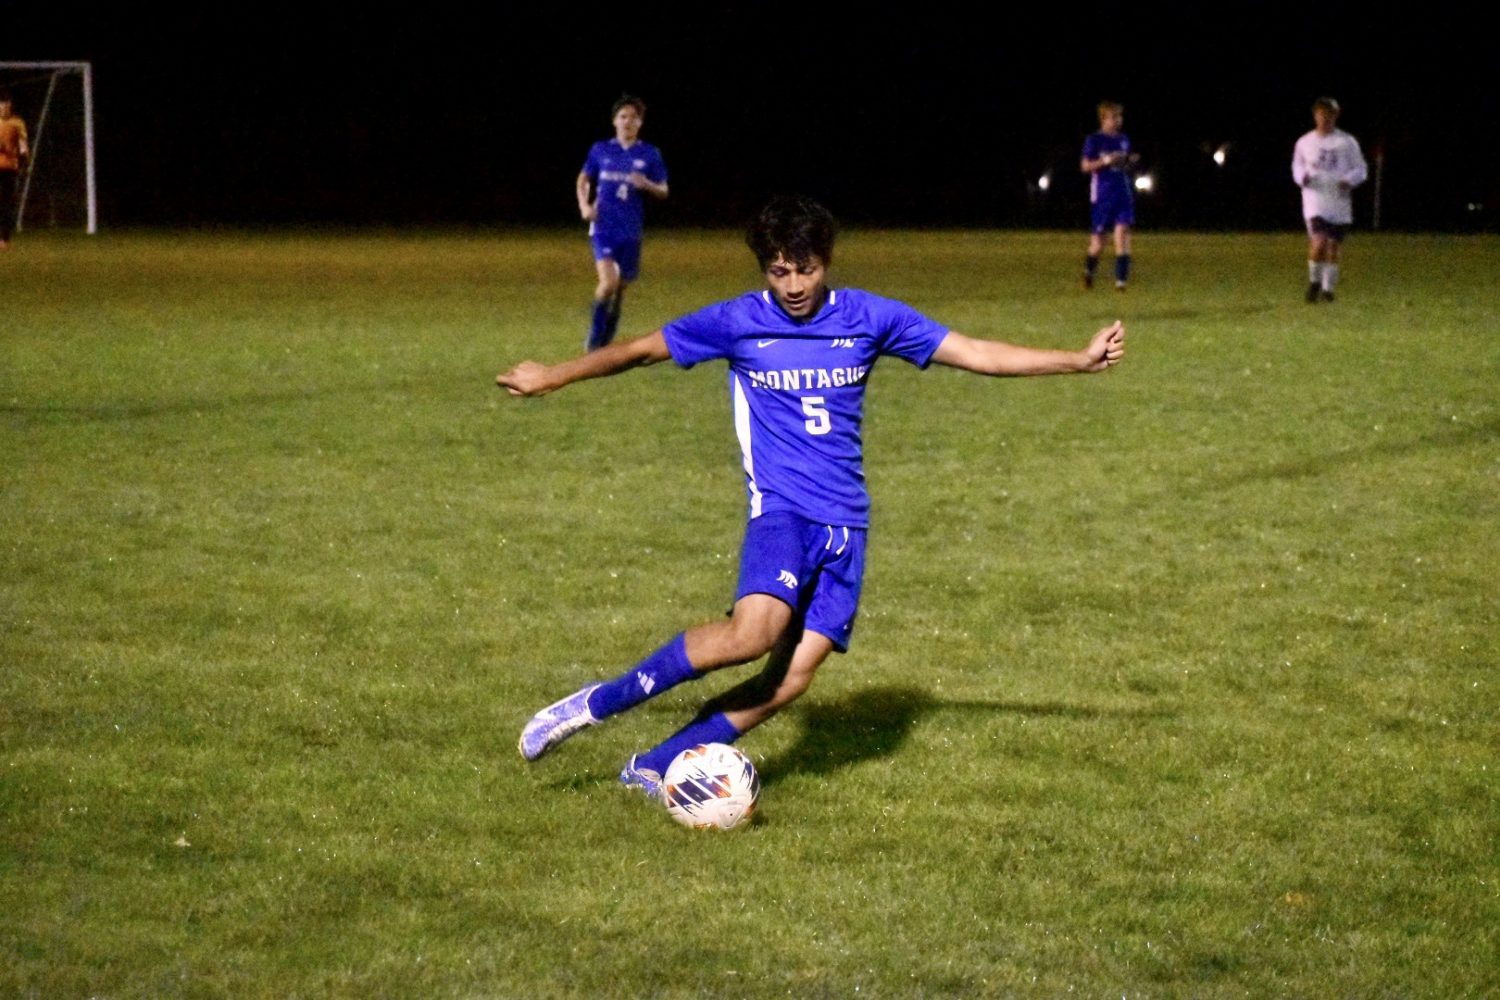 Montague is moving on in district soccer after defeating Shelby, 3-1